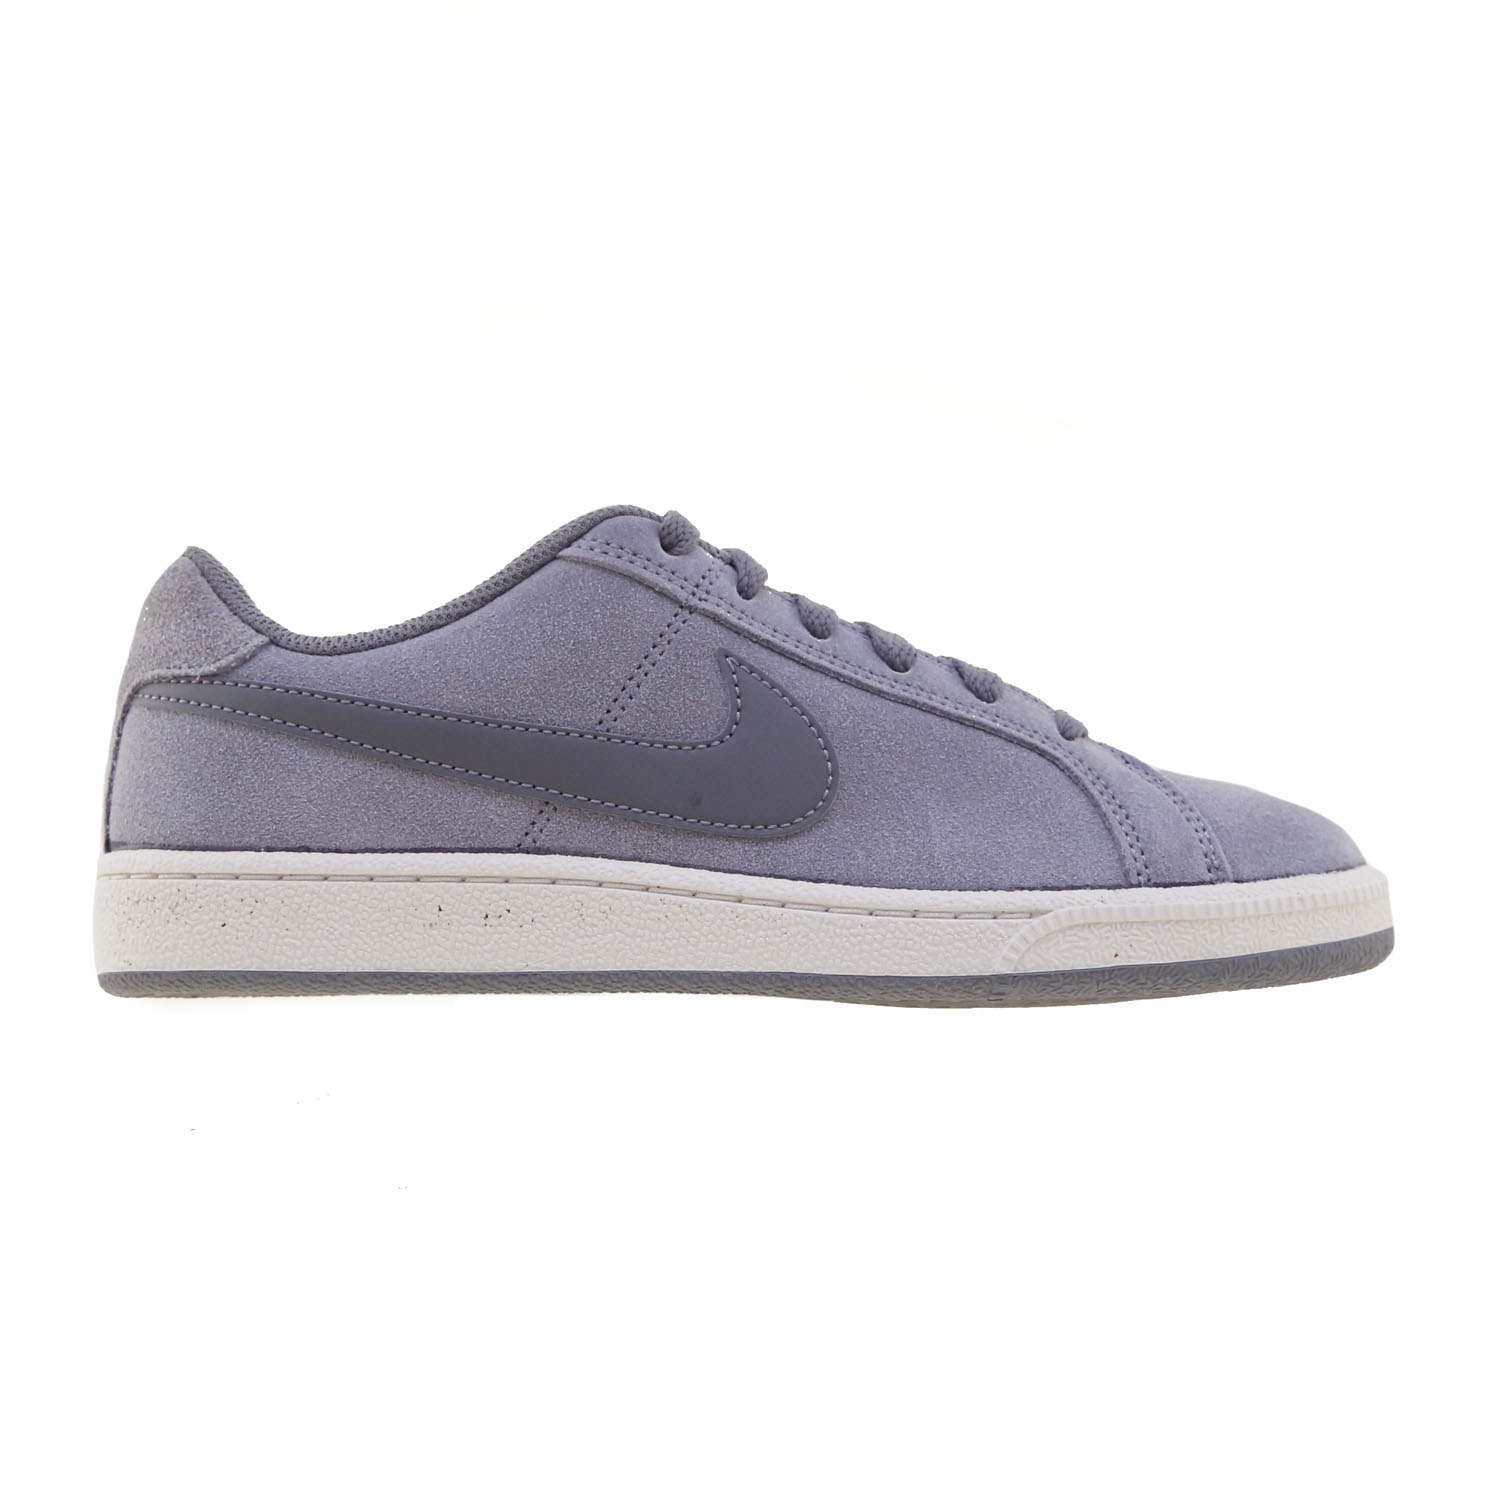 Nike Court Royale Suede W ( 916795-004 )